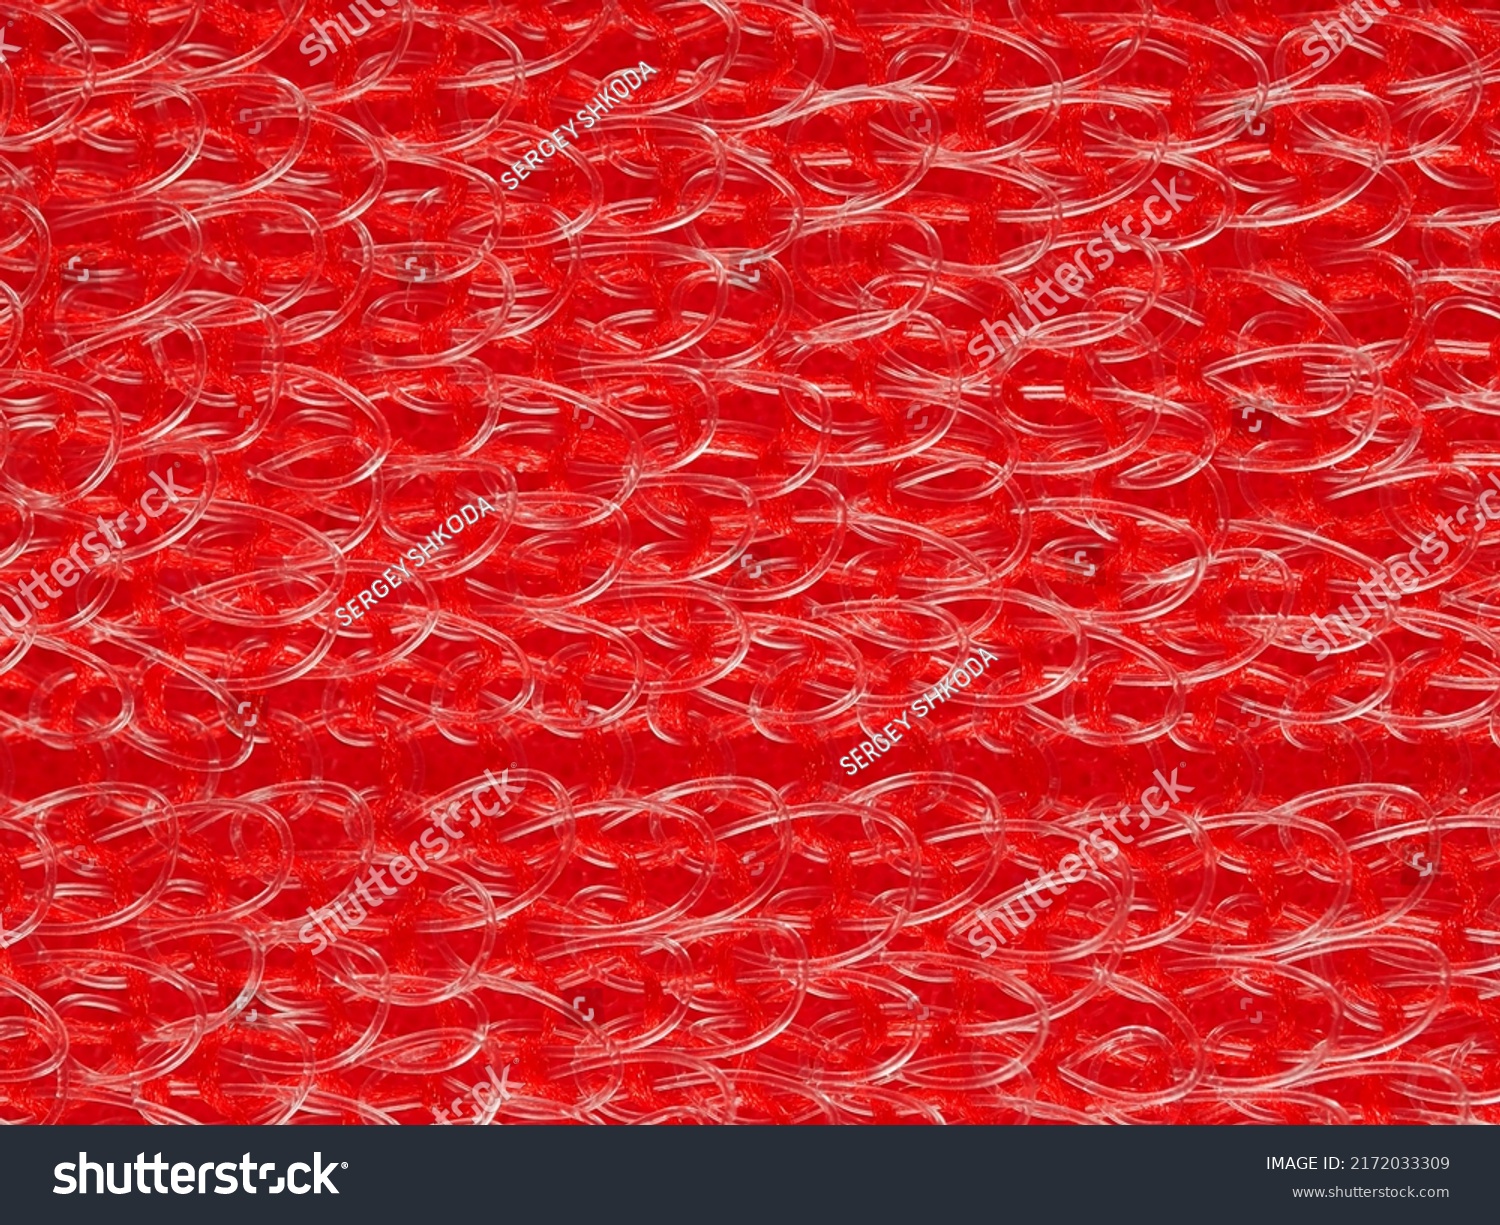 close up, background, texture, large horizontal banner. heterogeneous surface structure bright saturated red sponge for washing dishes, kitchen, bath. full depth of field. high resolution photo #2172033309